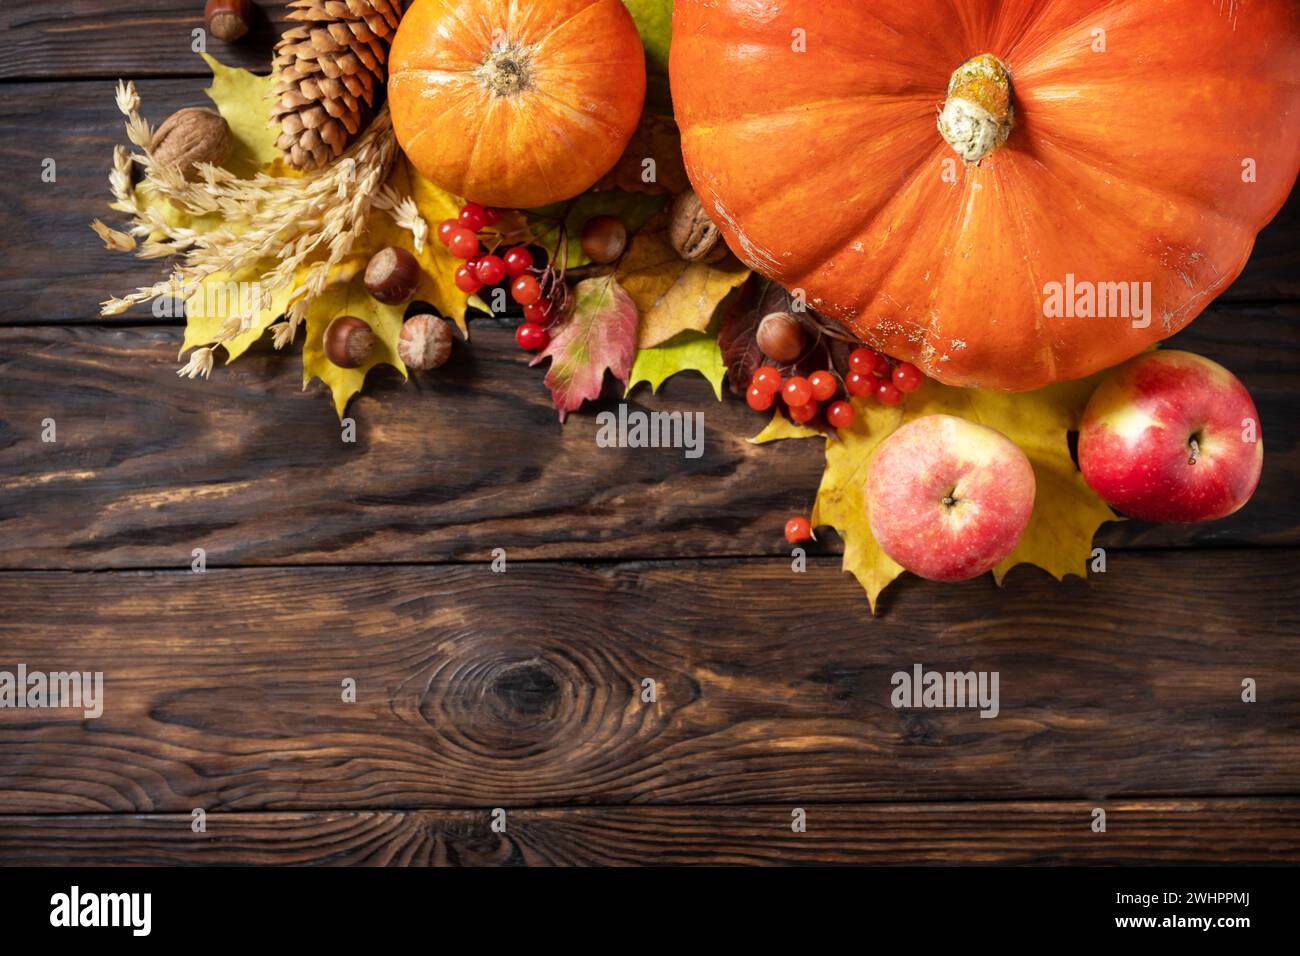 Autumn Day Thanksgiving or Halloween background. Festive autumn decor from ripe pumpkins, berries and leaves on a wooden backgro Stock Photo